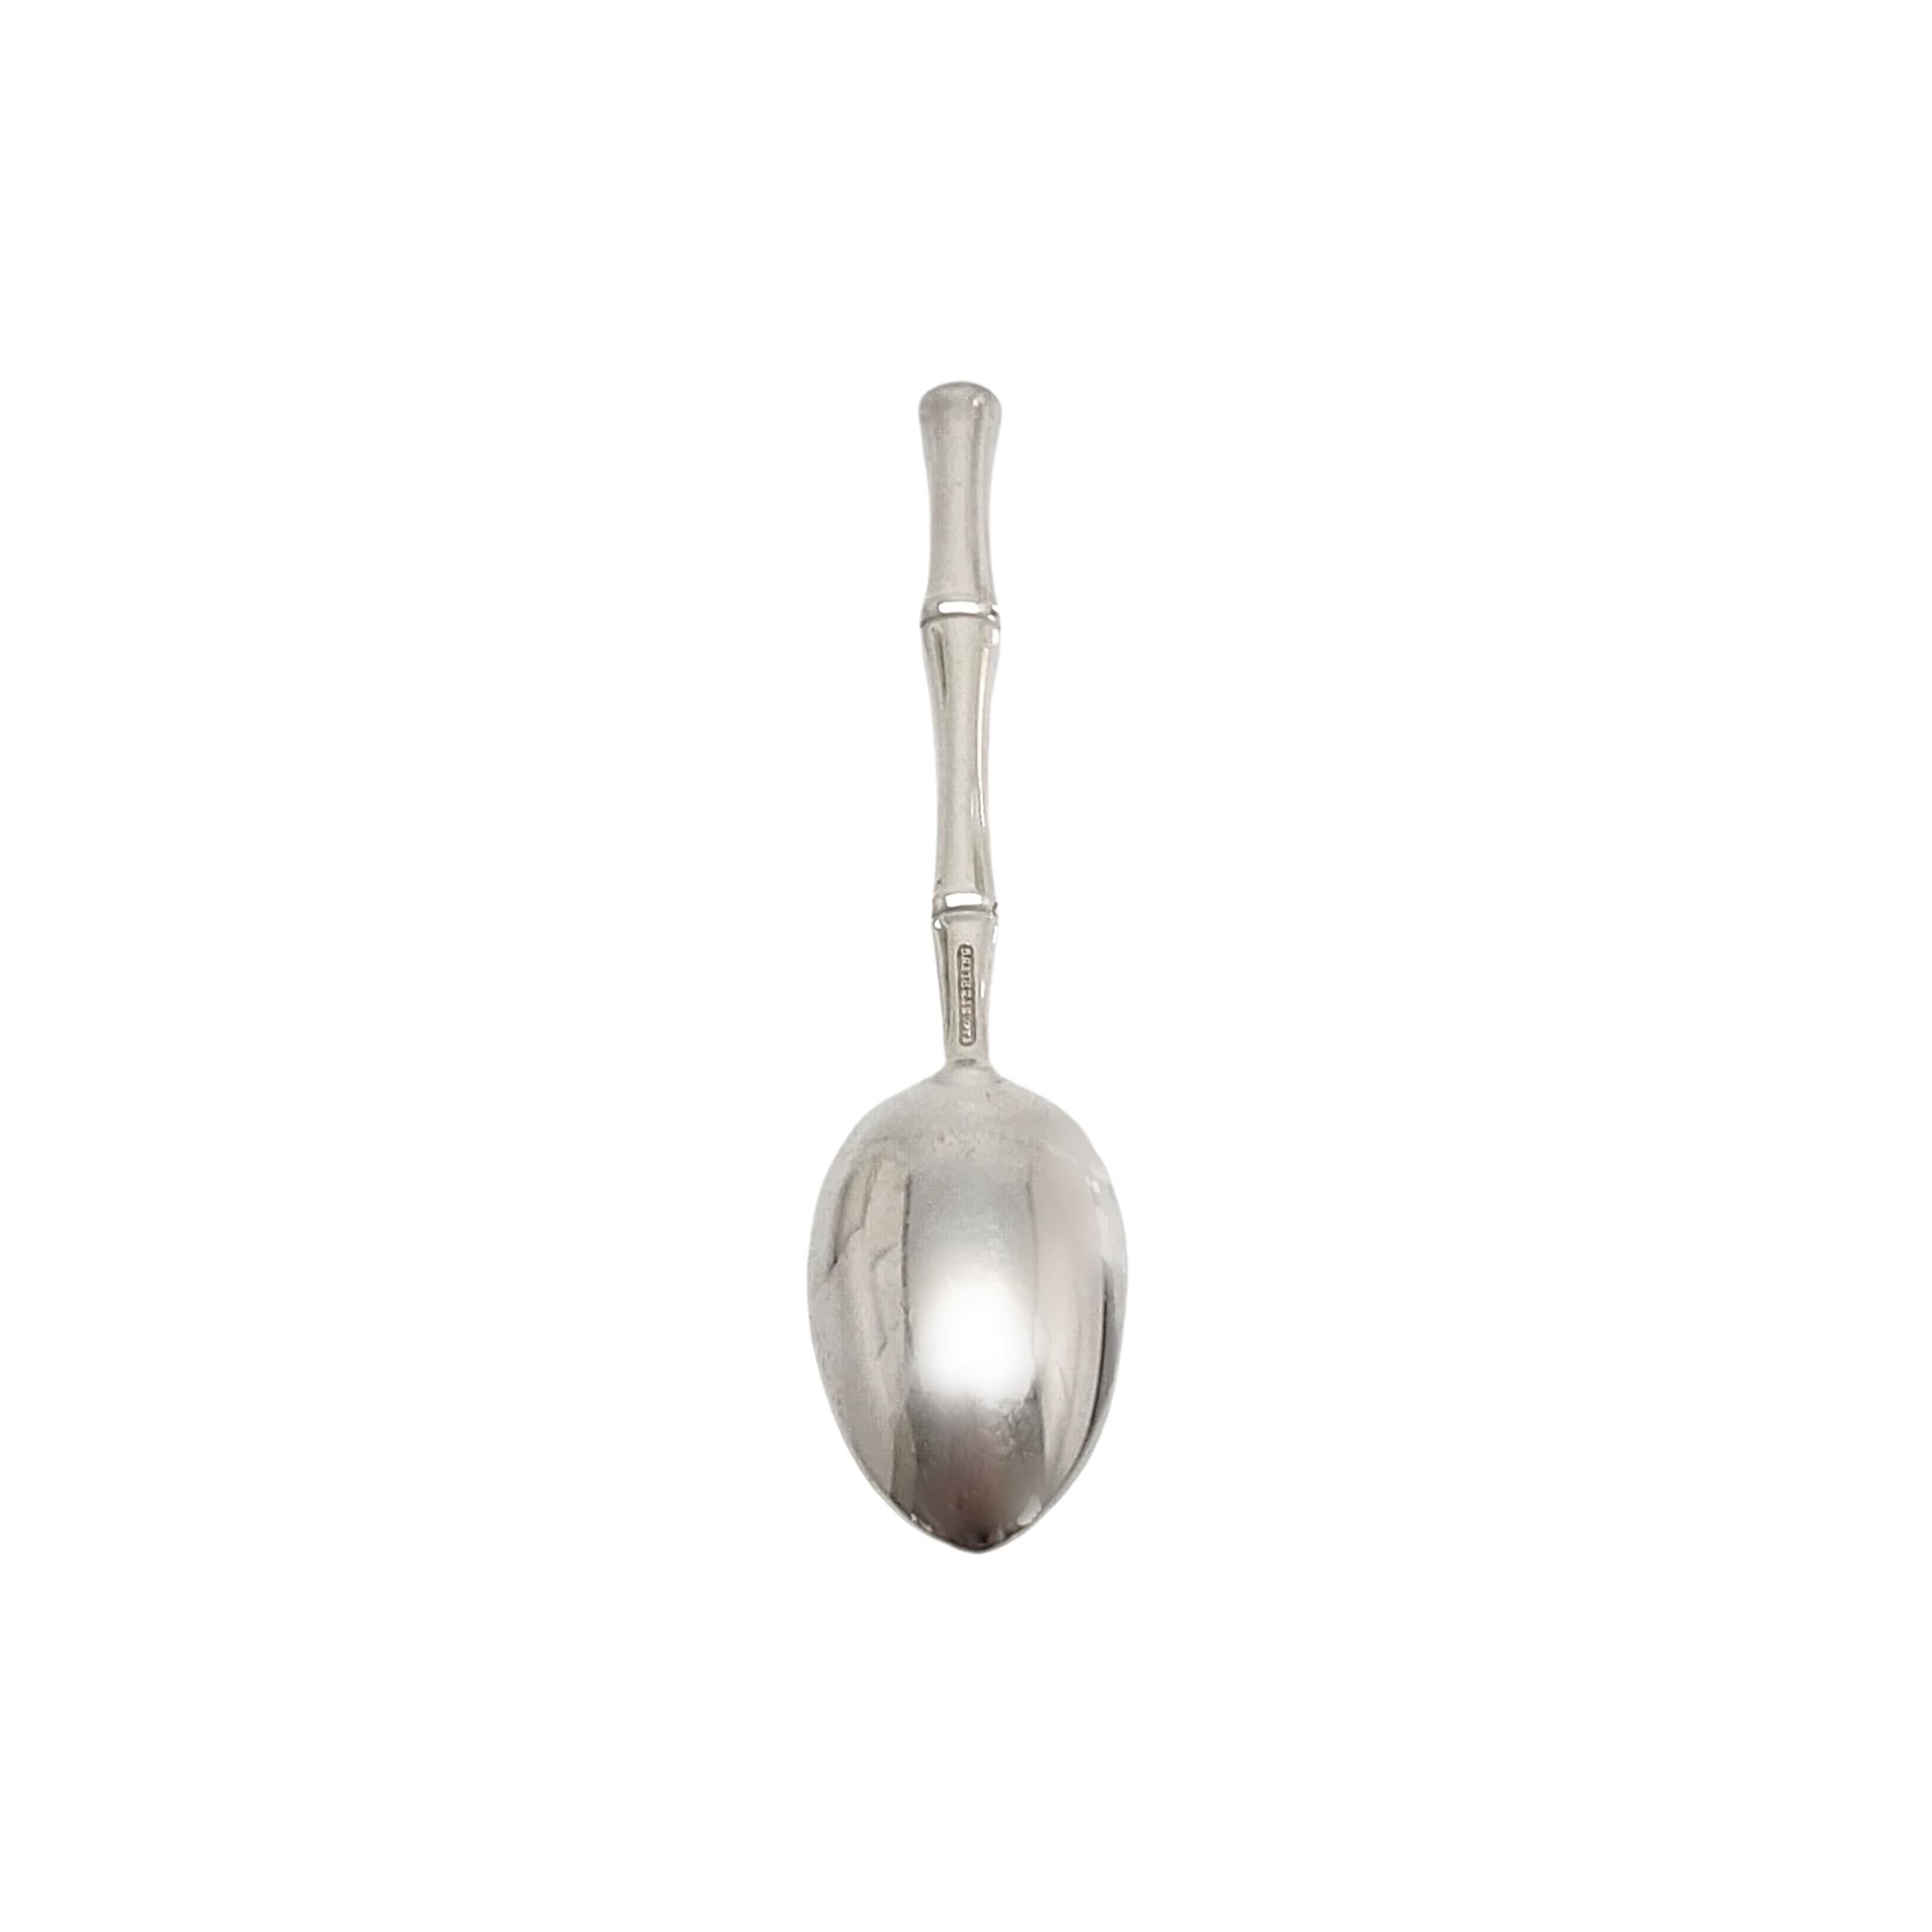 Tiffany & Co Sterling Silver Bamboo Demitasse Spoon 2